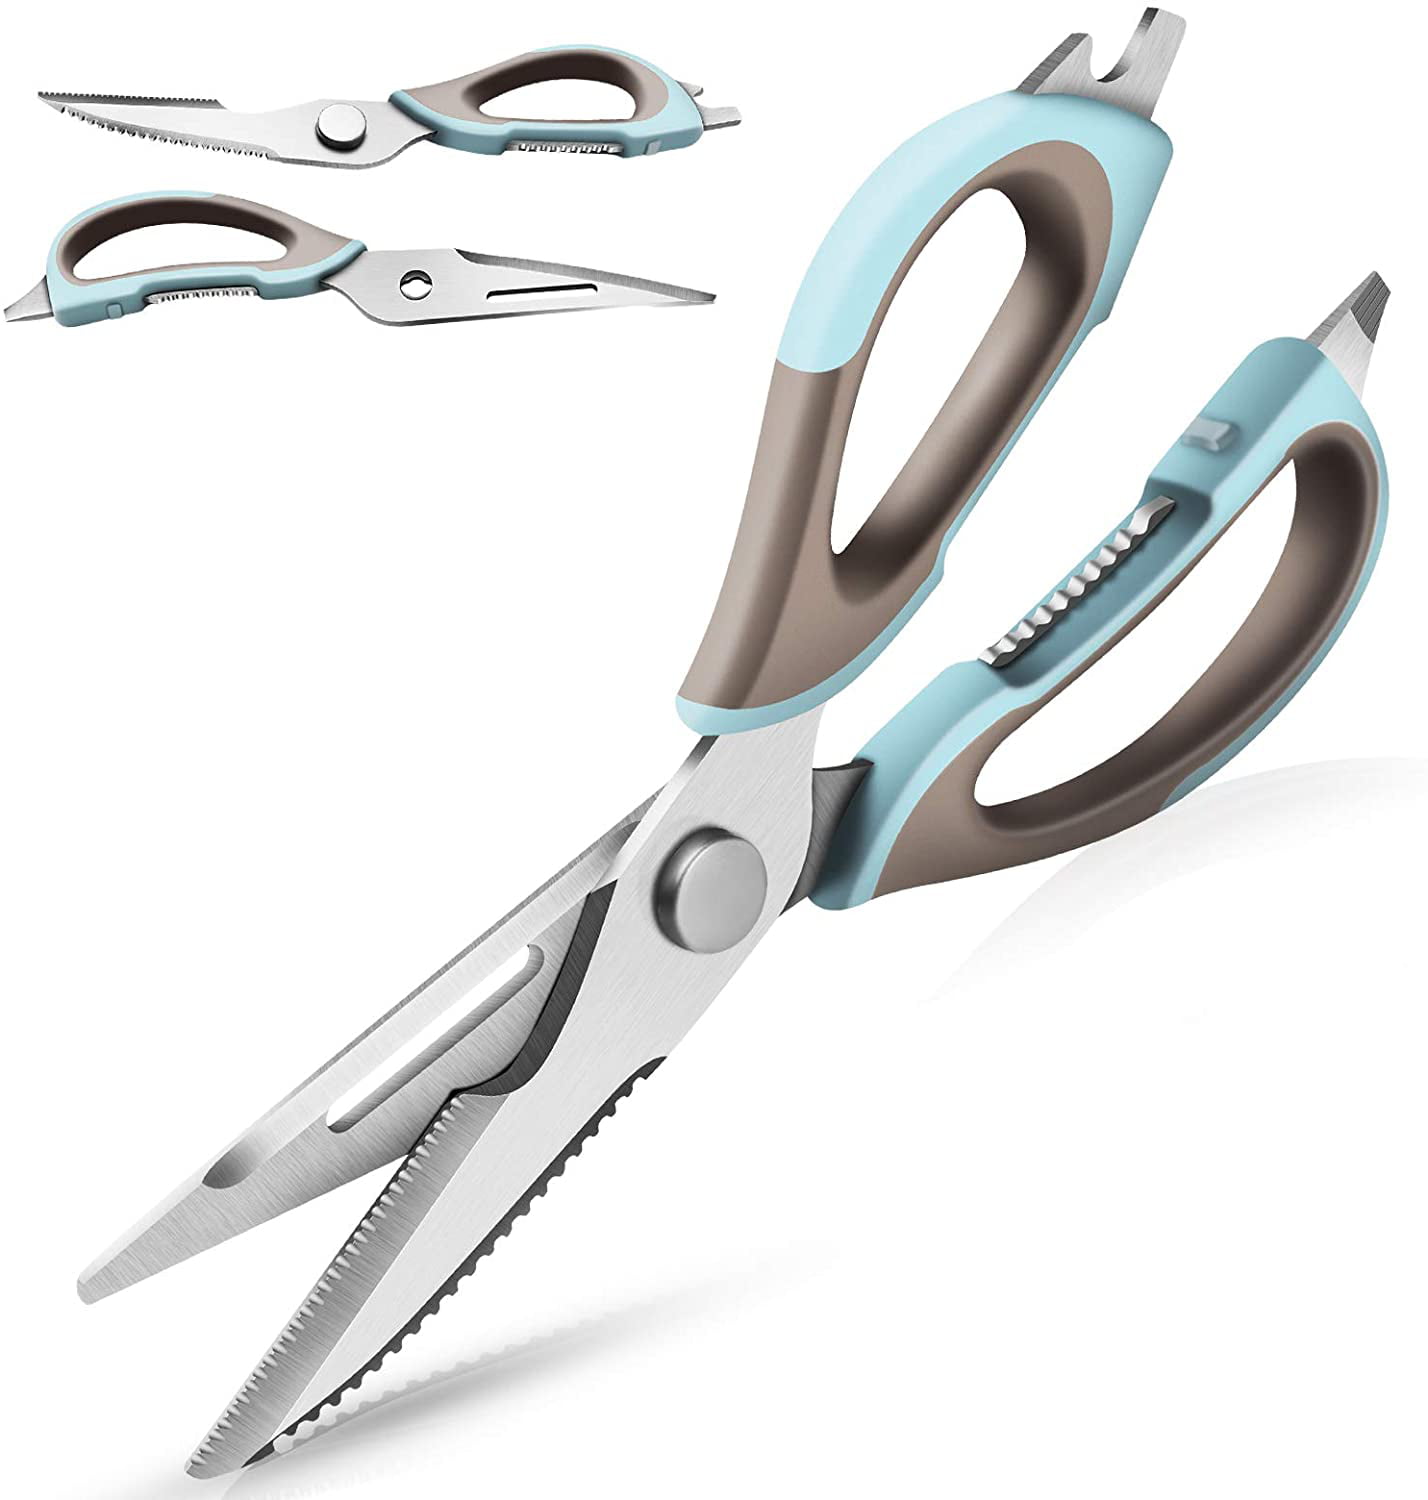  Multipurpose Kitchen Shears by WELLSTAR, Come Apart Heavy Duty  German Stainless Steel Food Scissors for Cutting Meat Poultry Chicken  Vegetable, Plus Handy Onion Slicing Holder, Gift Box Pack : Home 